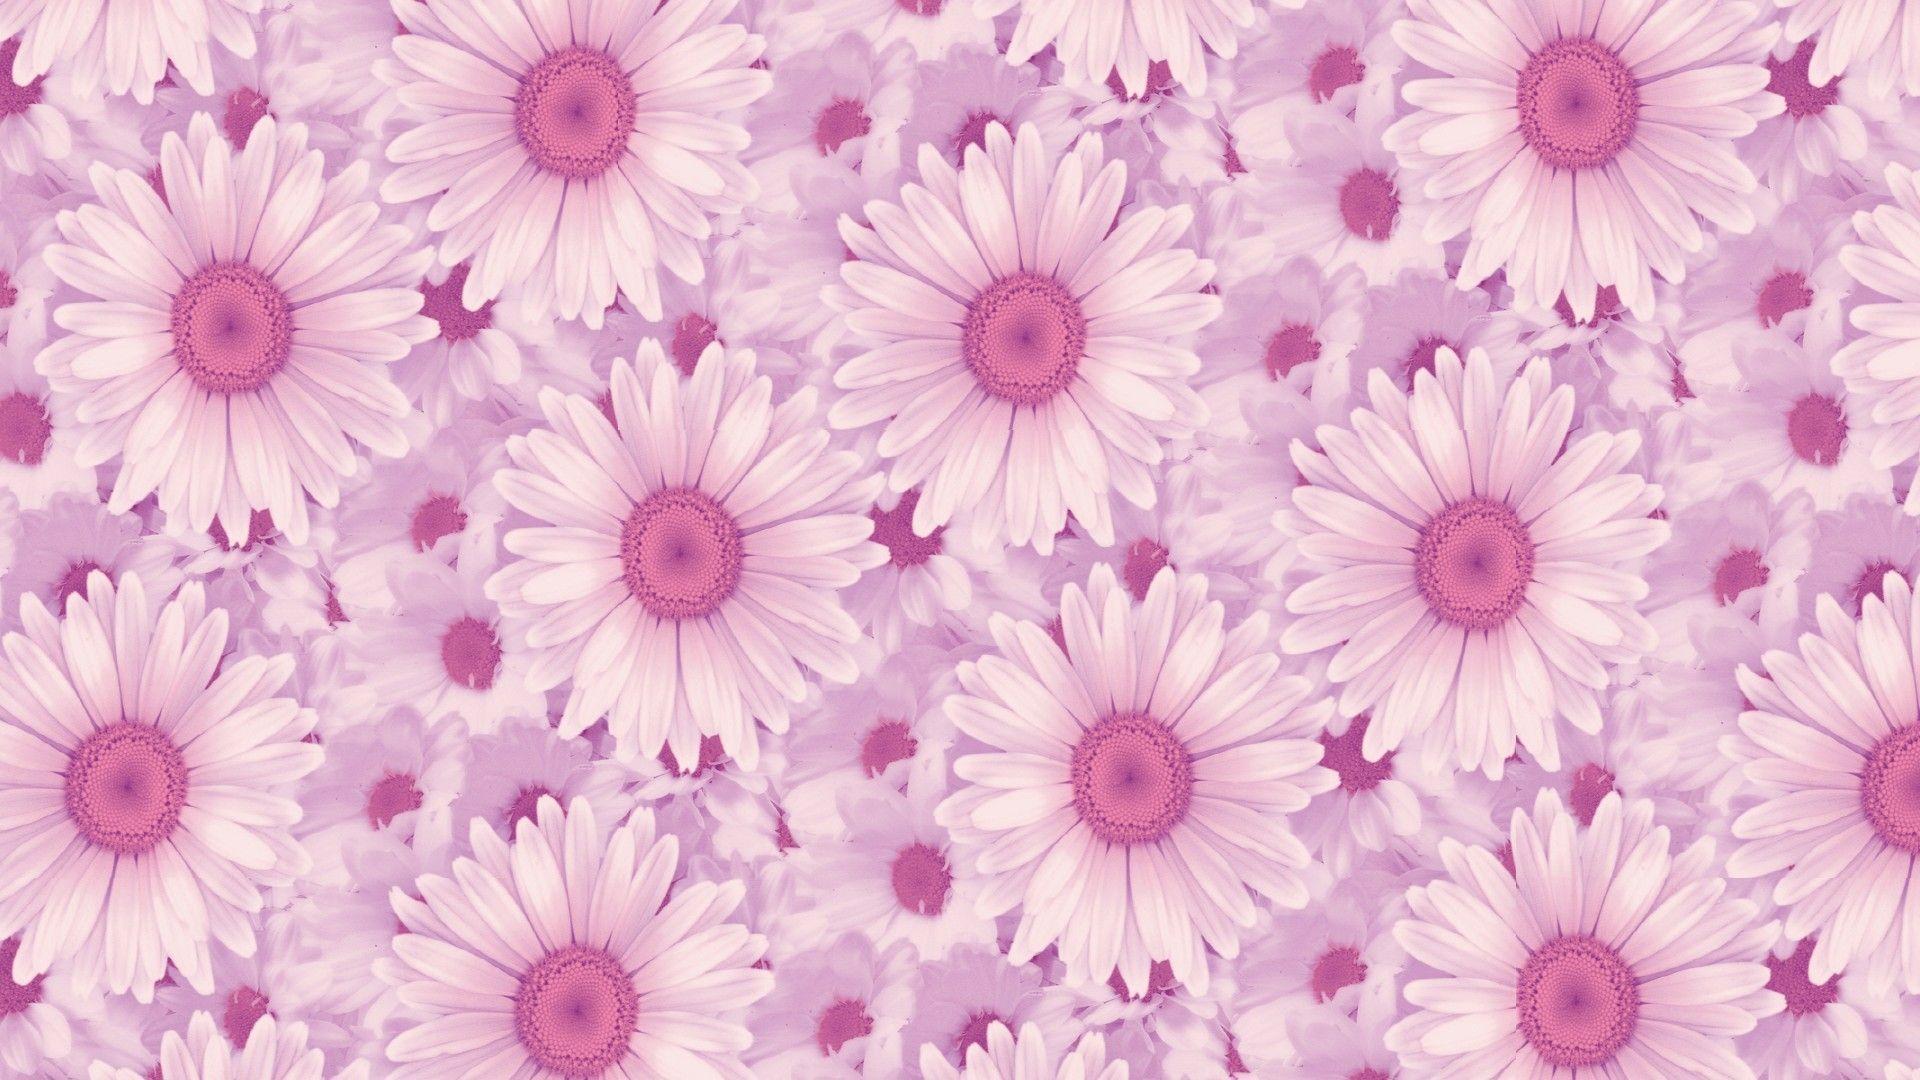 Pink Daisy Backgrounds - Wallpaper Cave